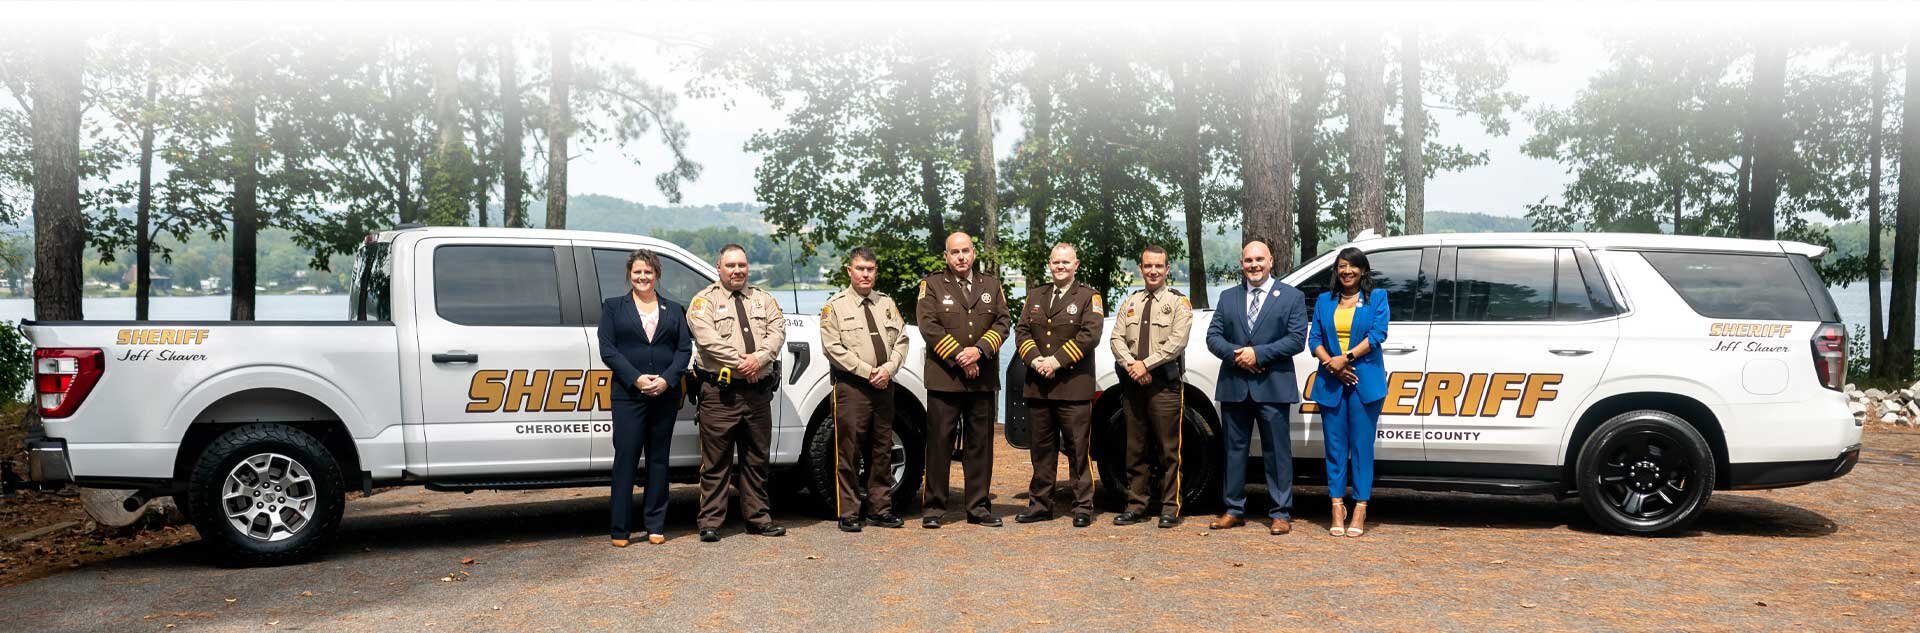 Cherokee County Sheriffs Office staff standing in front of patrol vehicles parked in front of trees